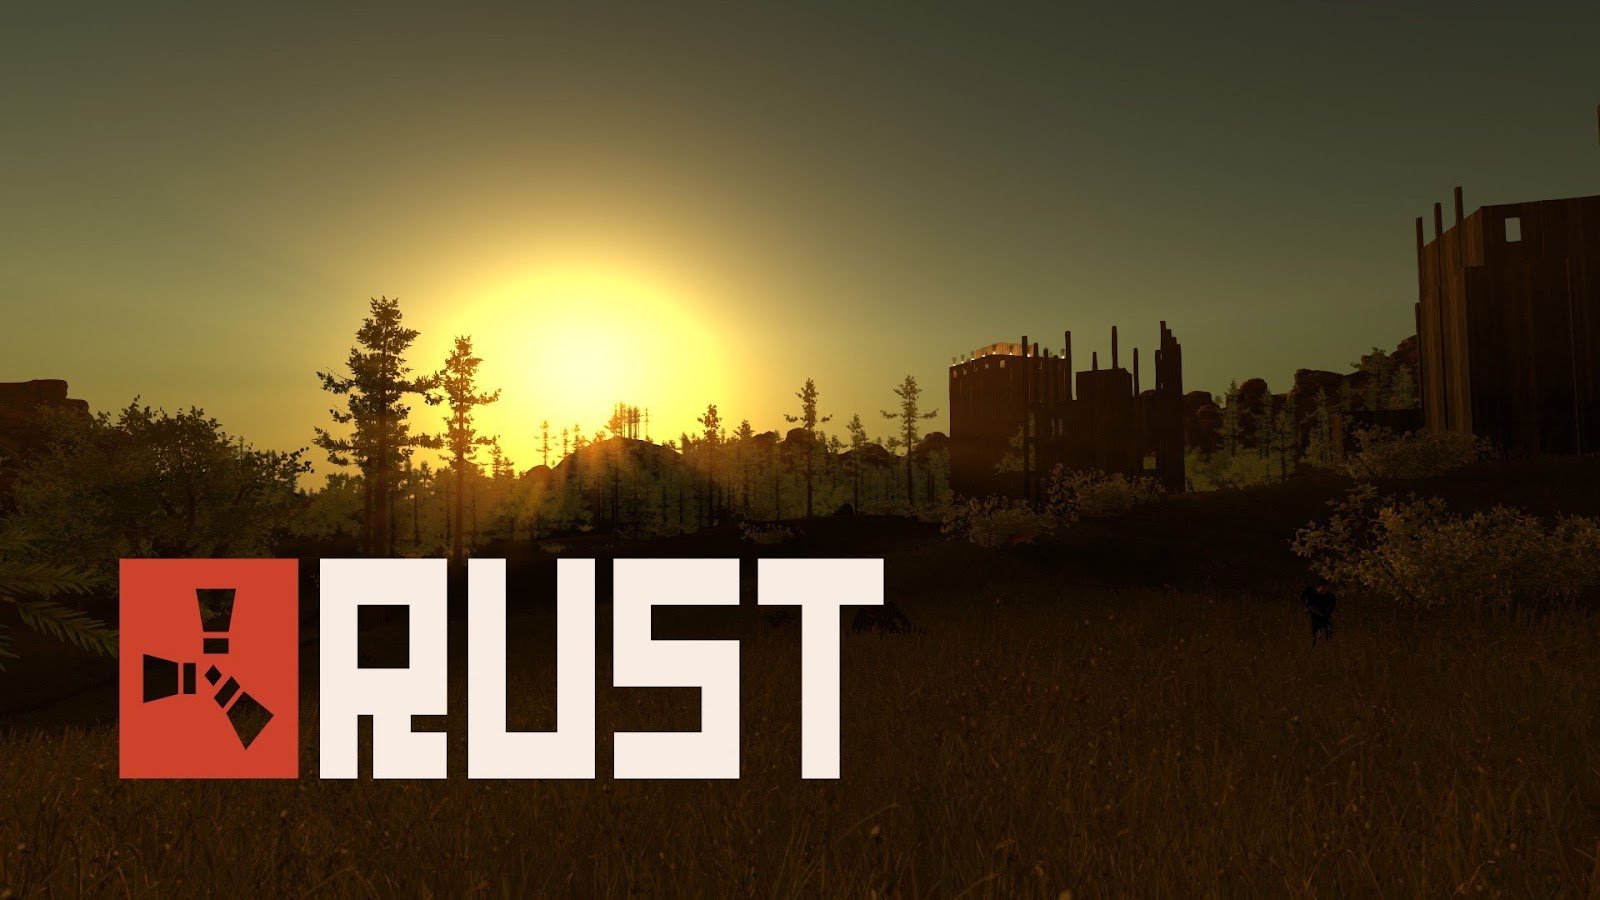 Name for rust фото 82